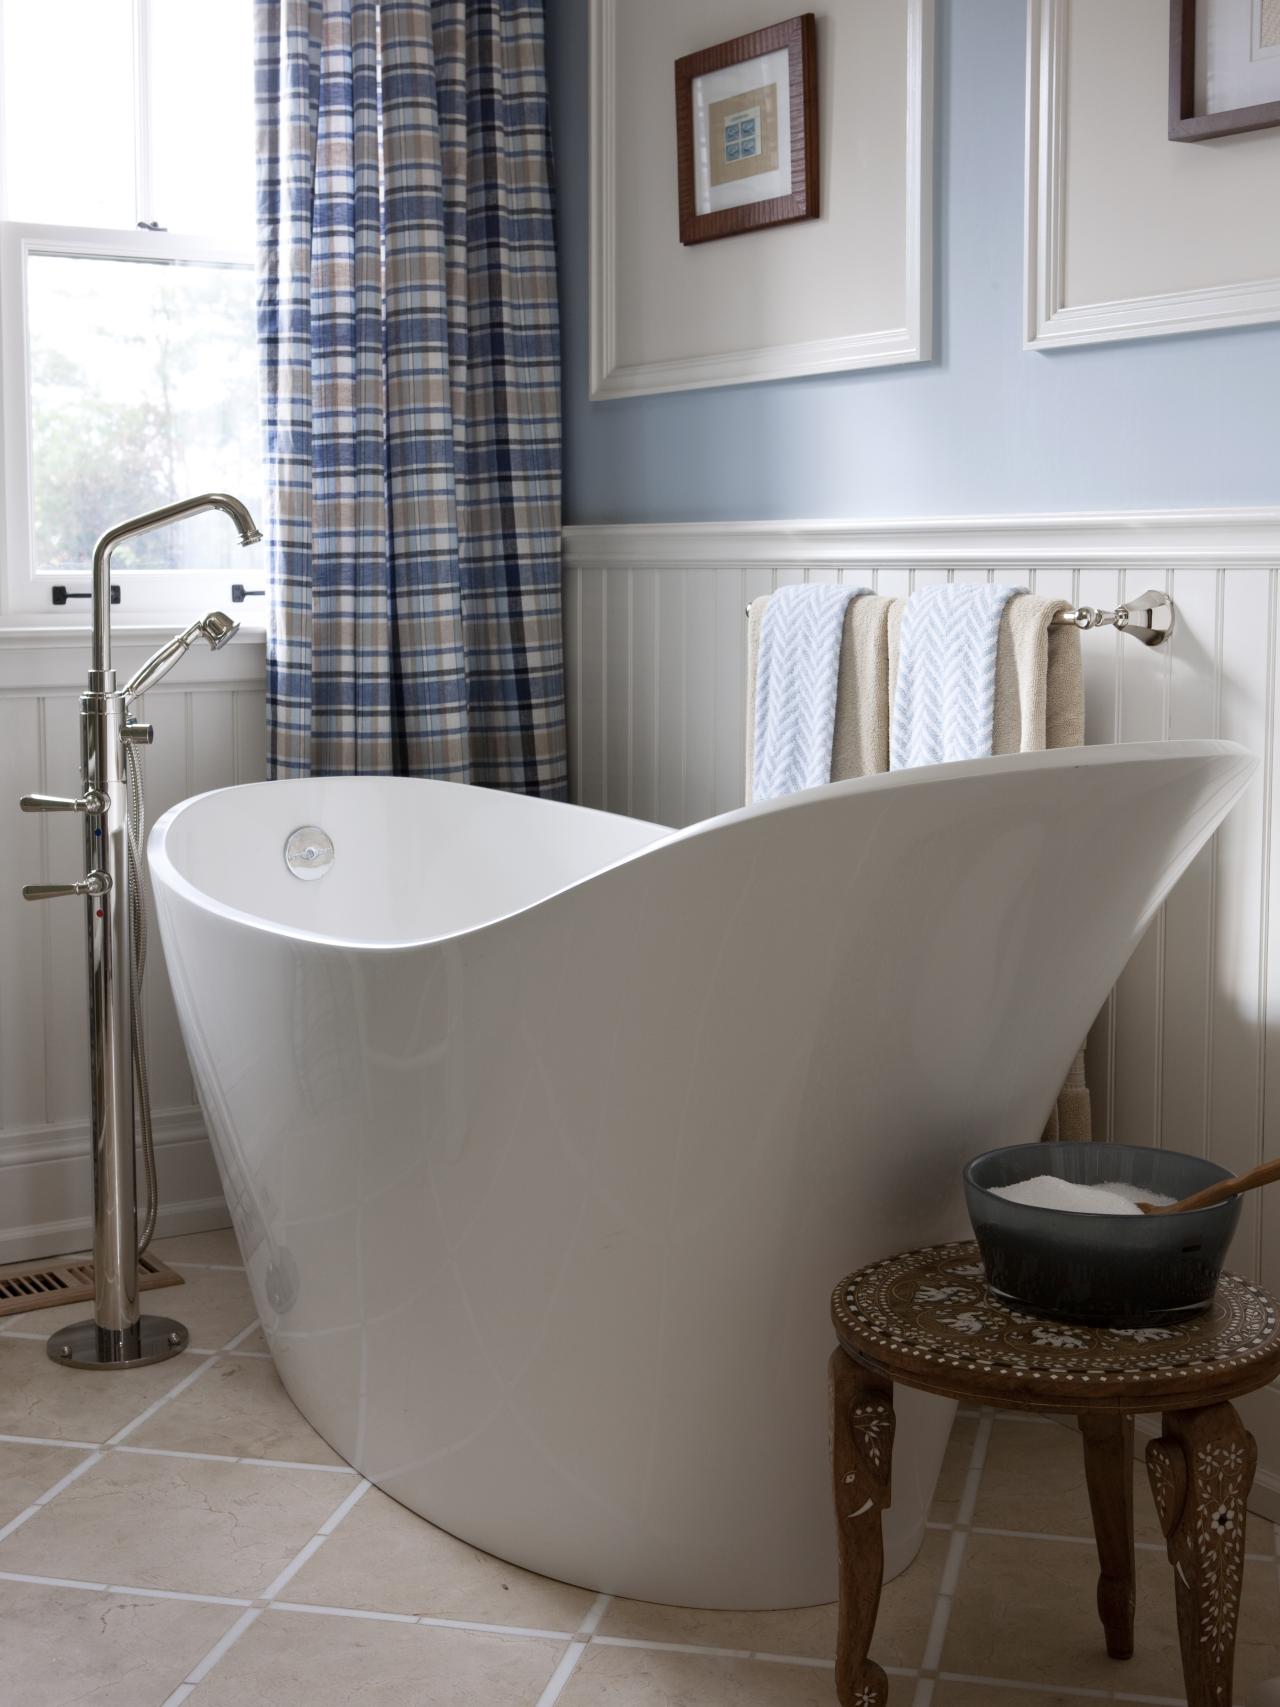 Tub And Shower Combos Pictures Ideas Tips From HGTV HGTV